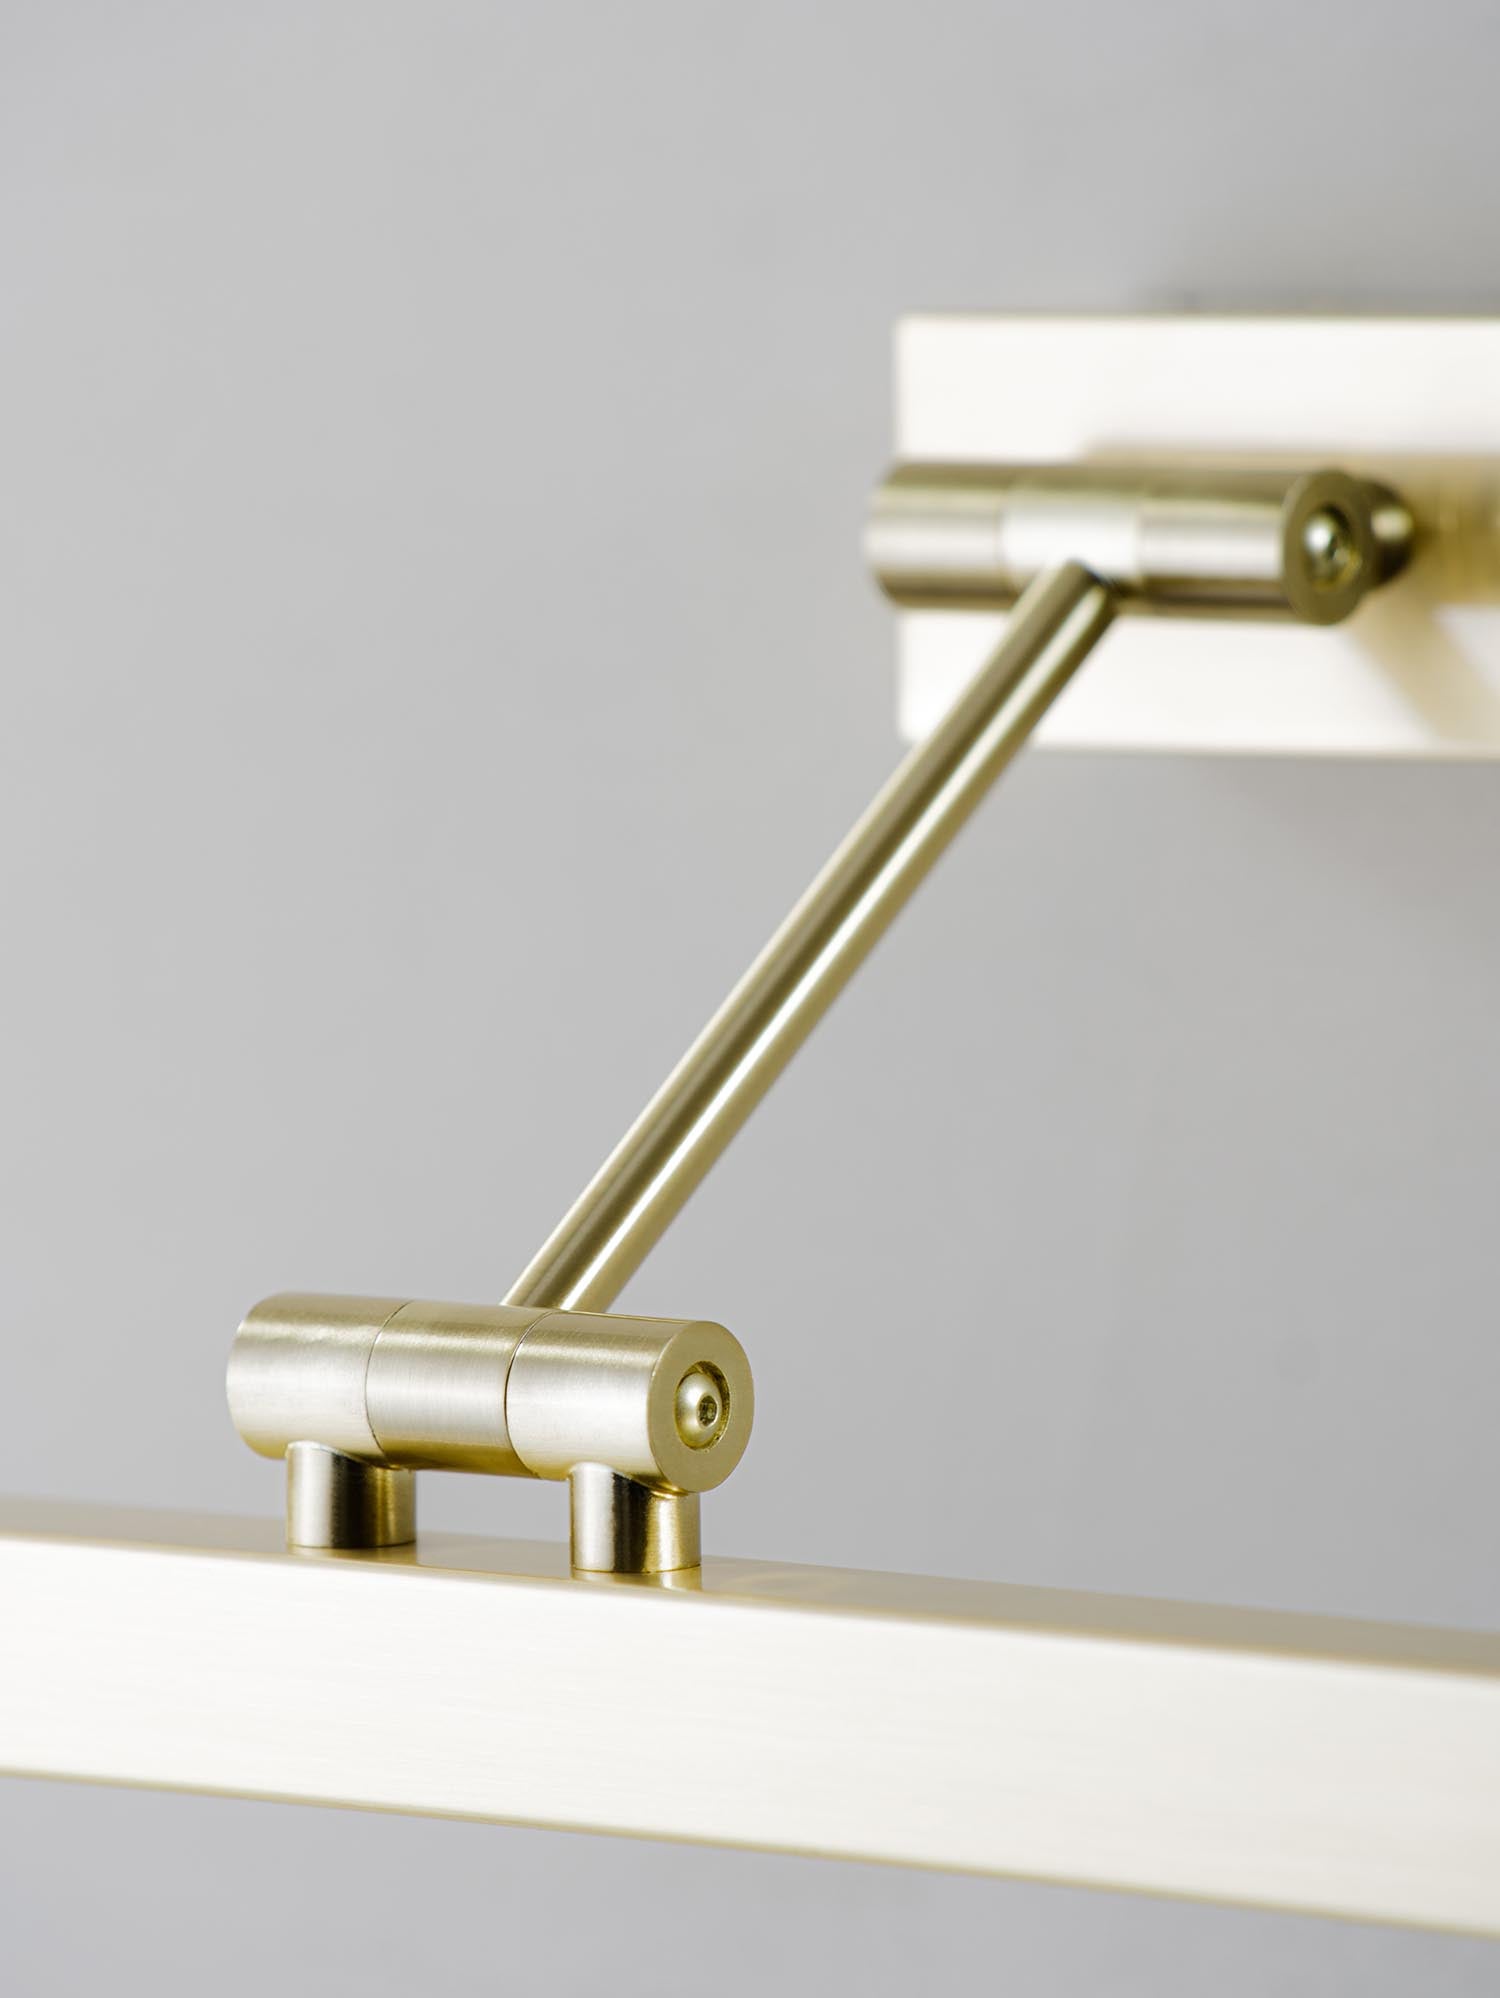 Shown in Brushed Brass